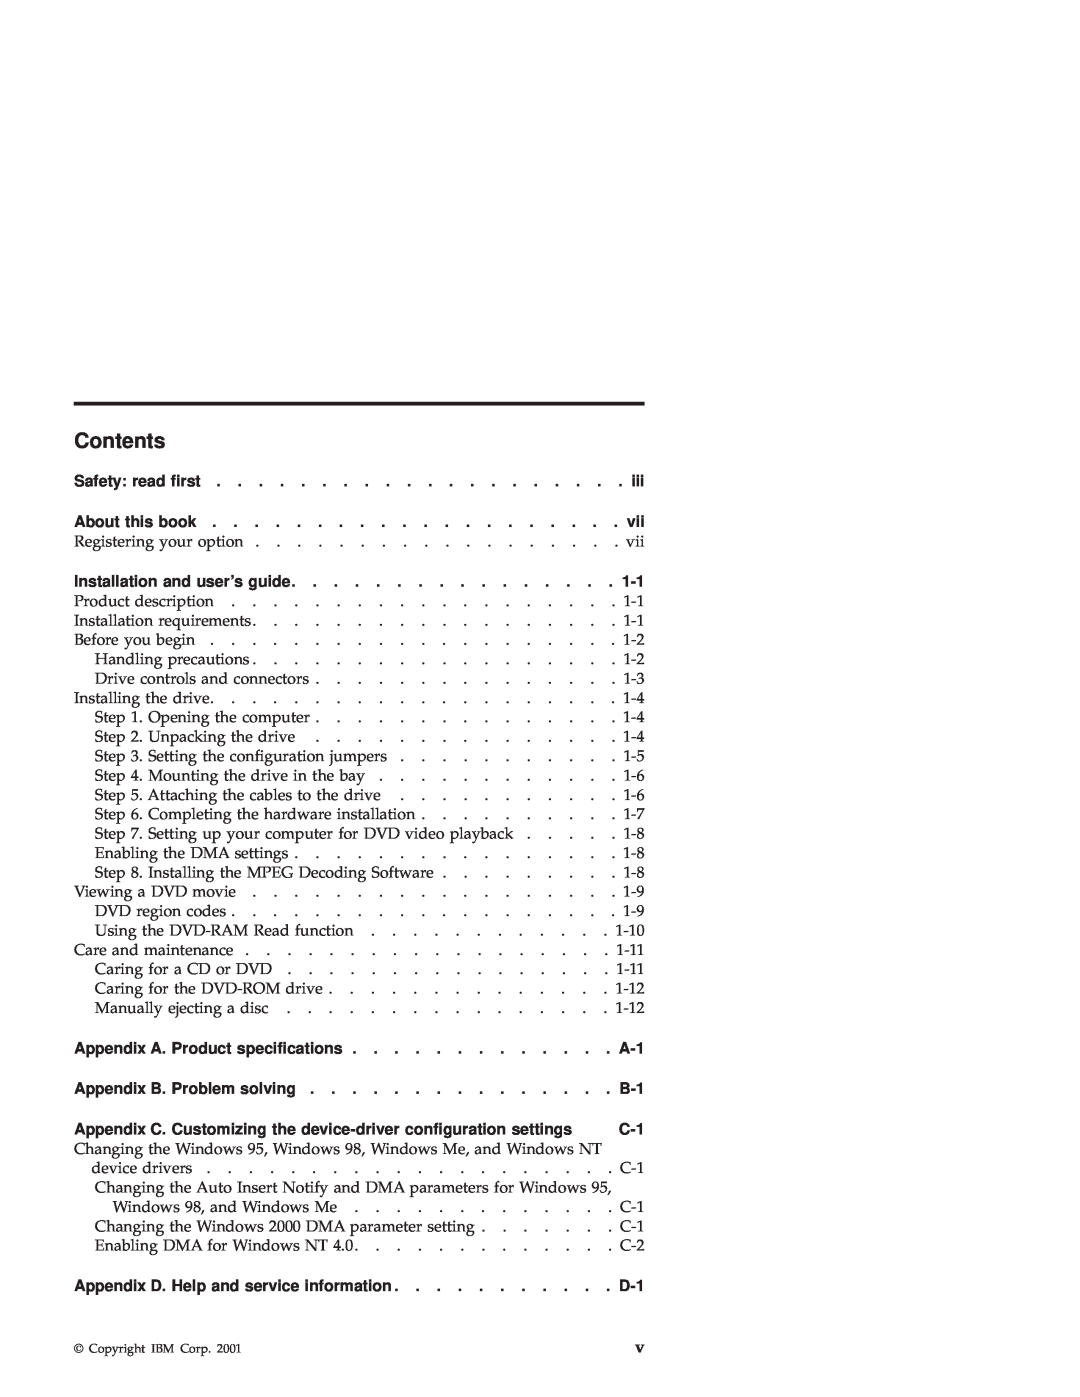 IBM 71P7285 manual Contents, Registering your option 